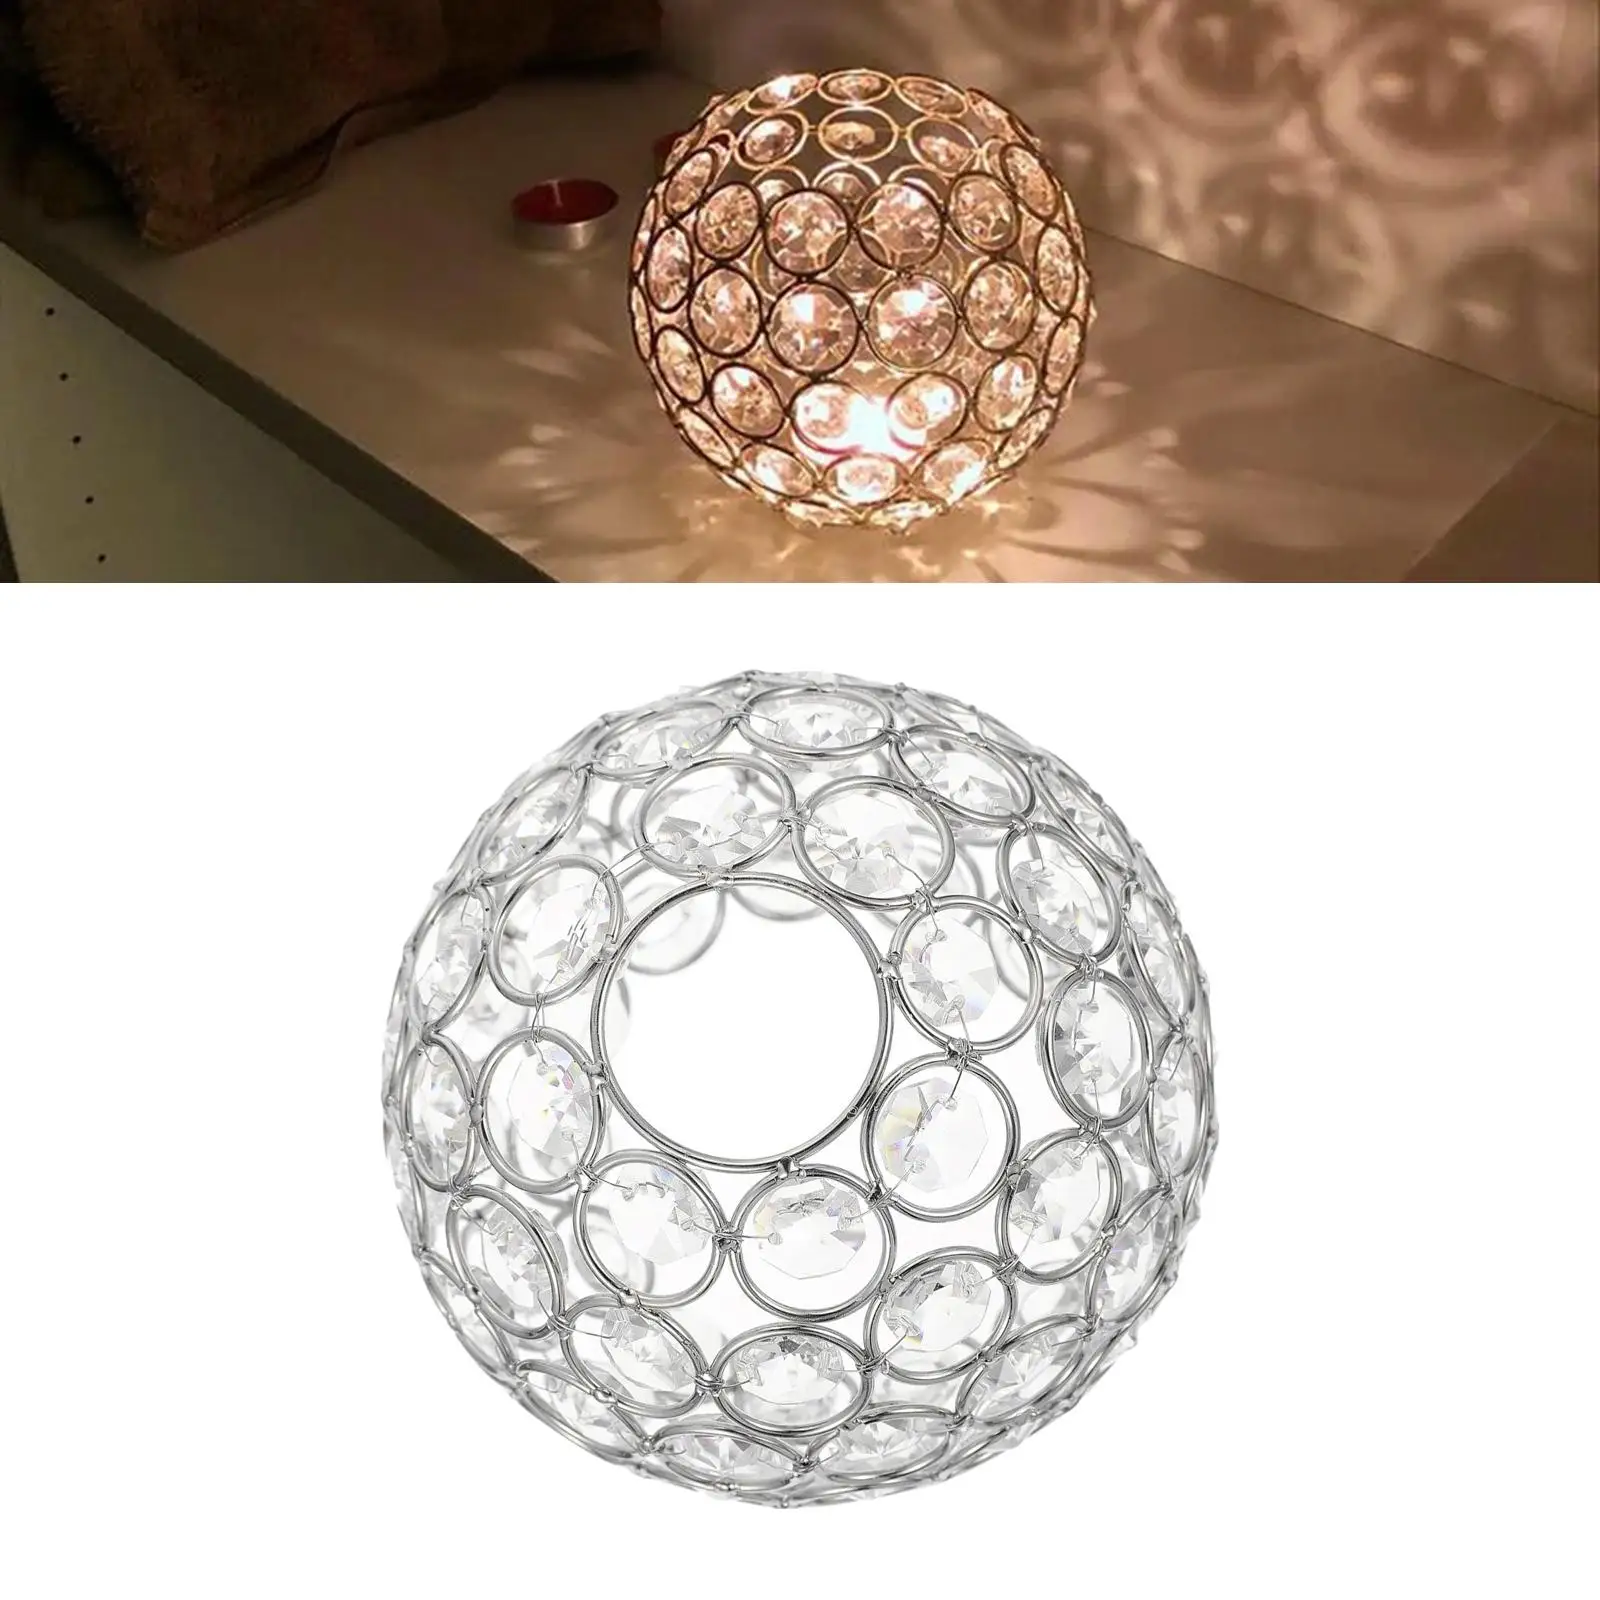 Shiny Ceiling Light Shade Replacement Cover Hand Crafted Clip On Crystal Lampshade for Antique Lamp Desk Light College Party